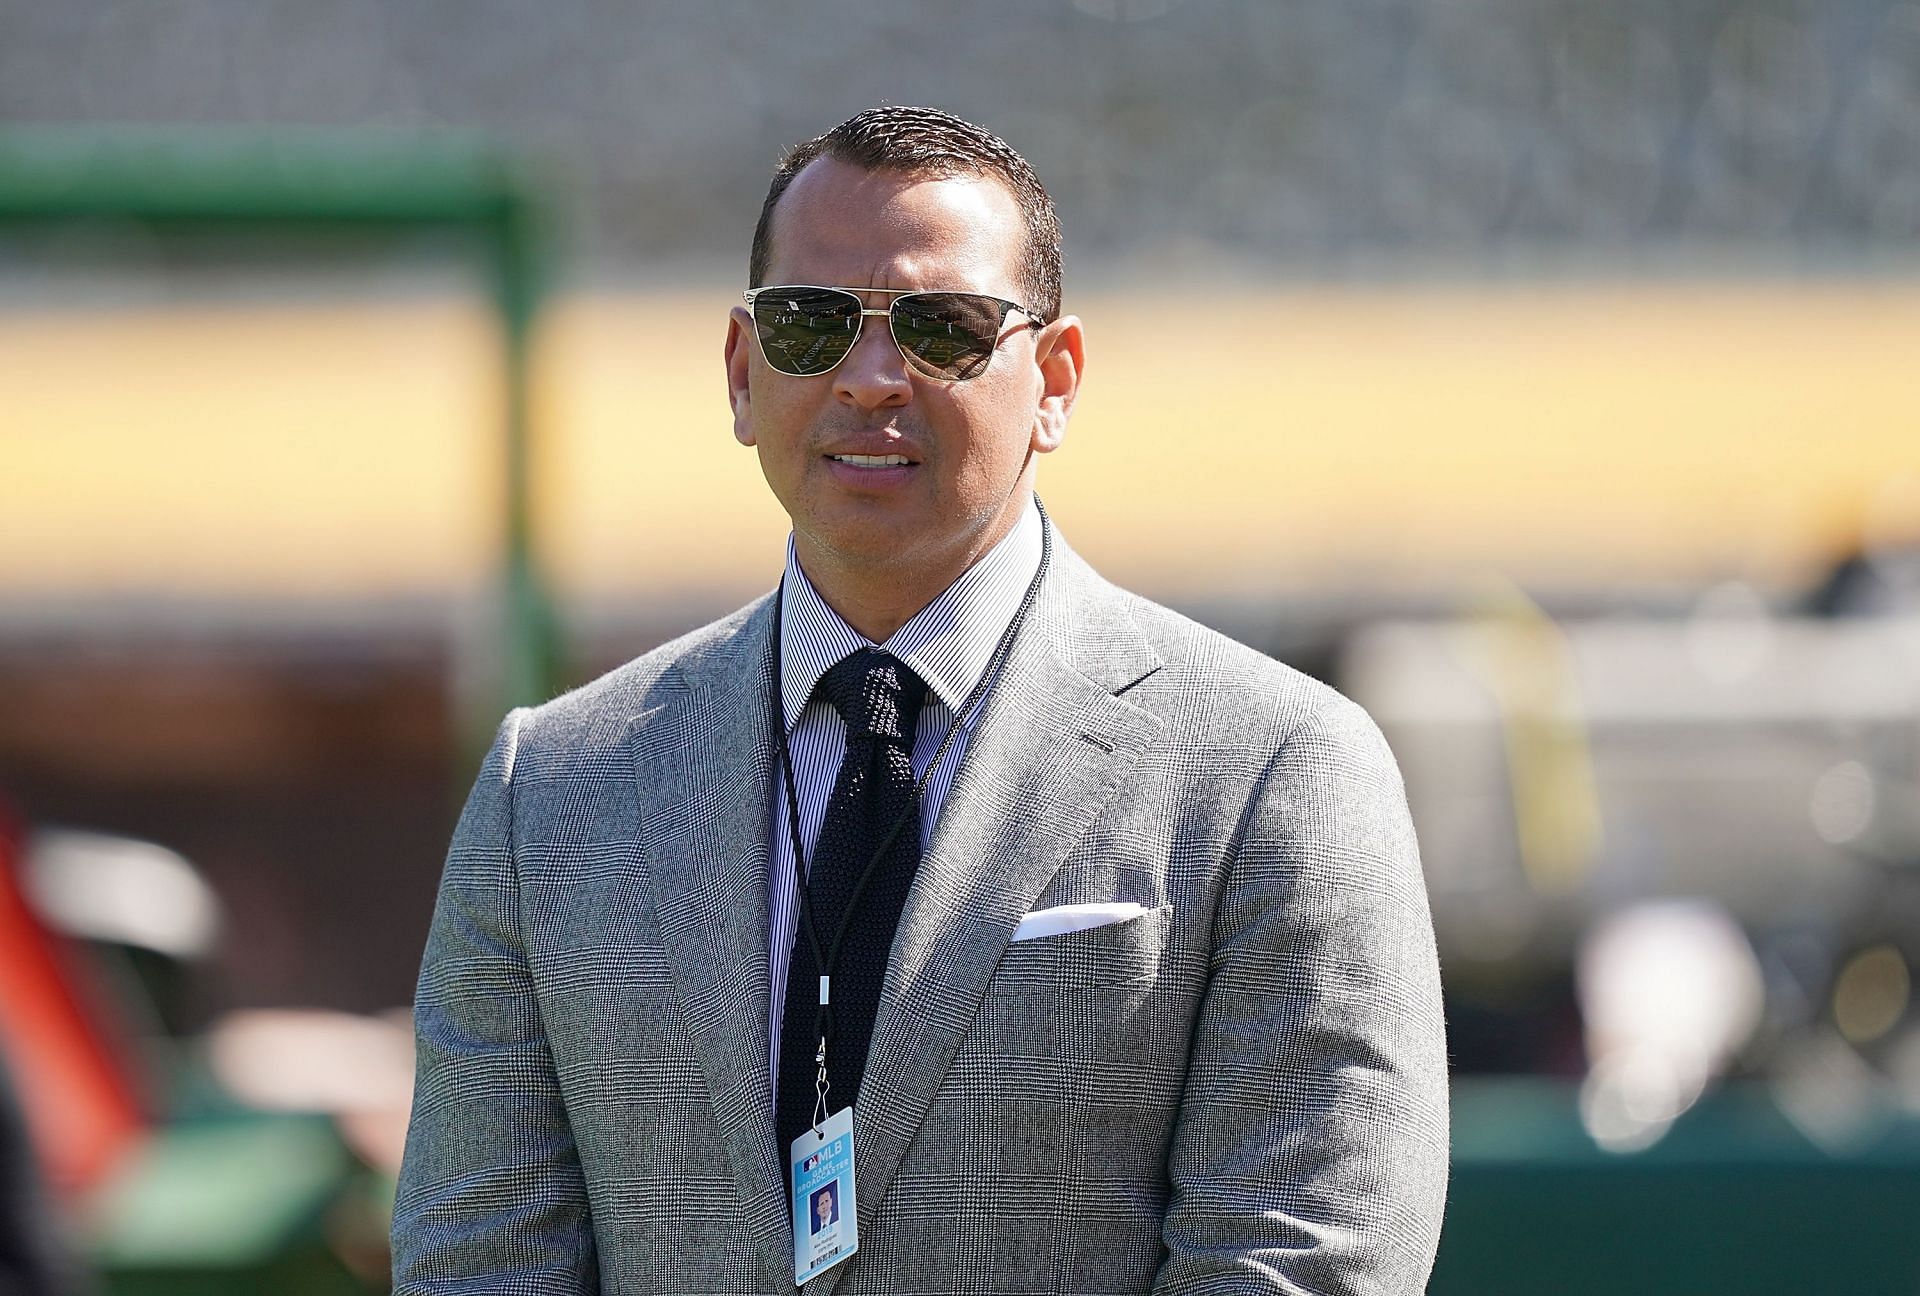 Alex Rodriguez spent nearly two decades in the MLB